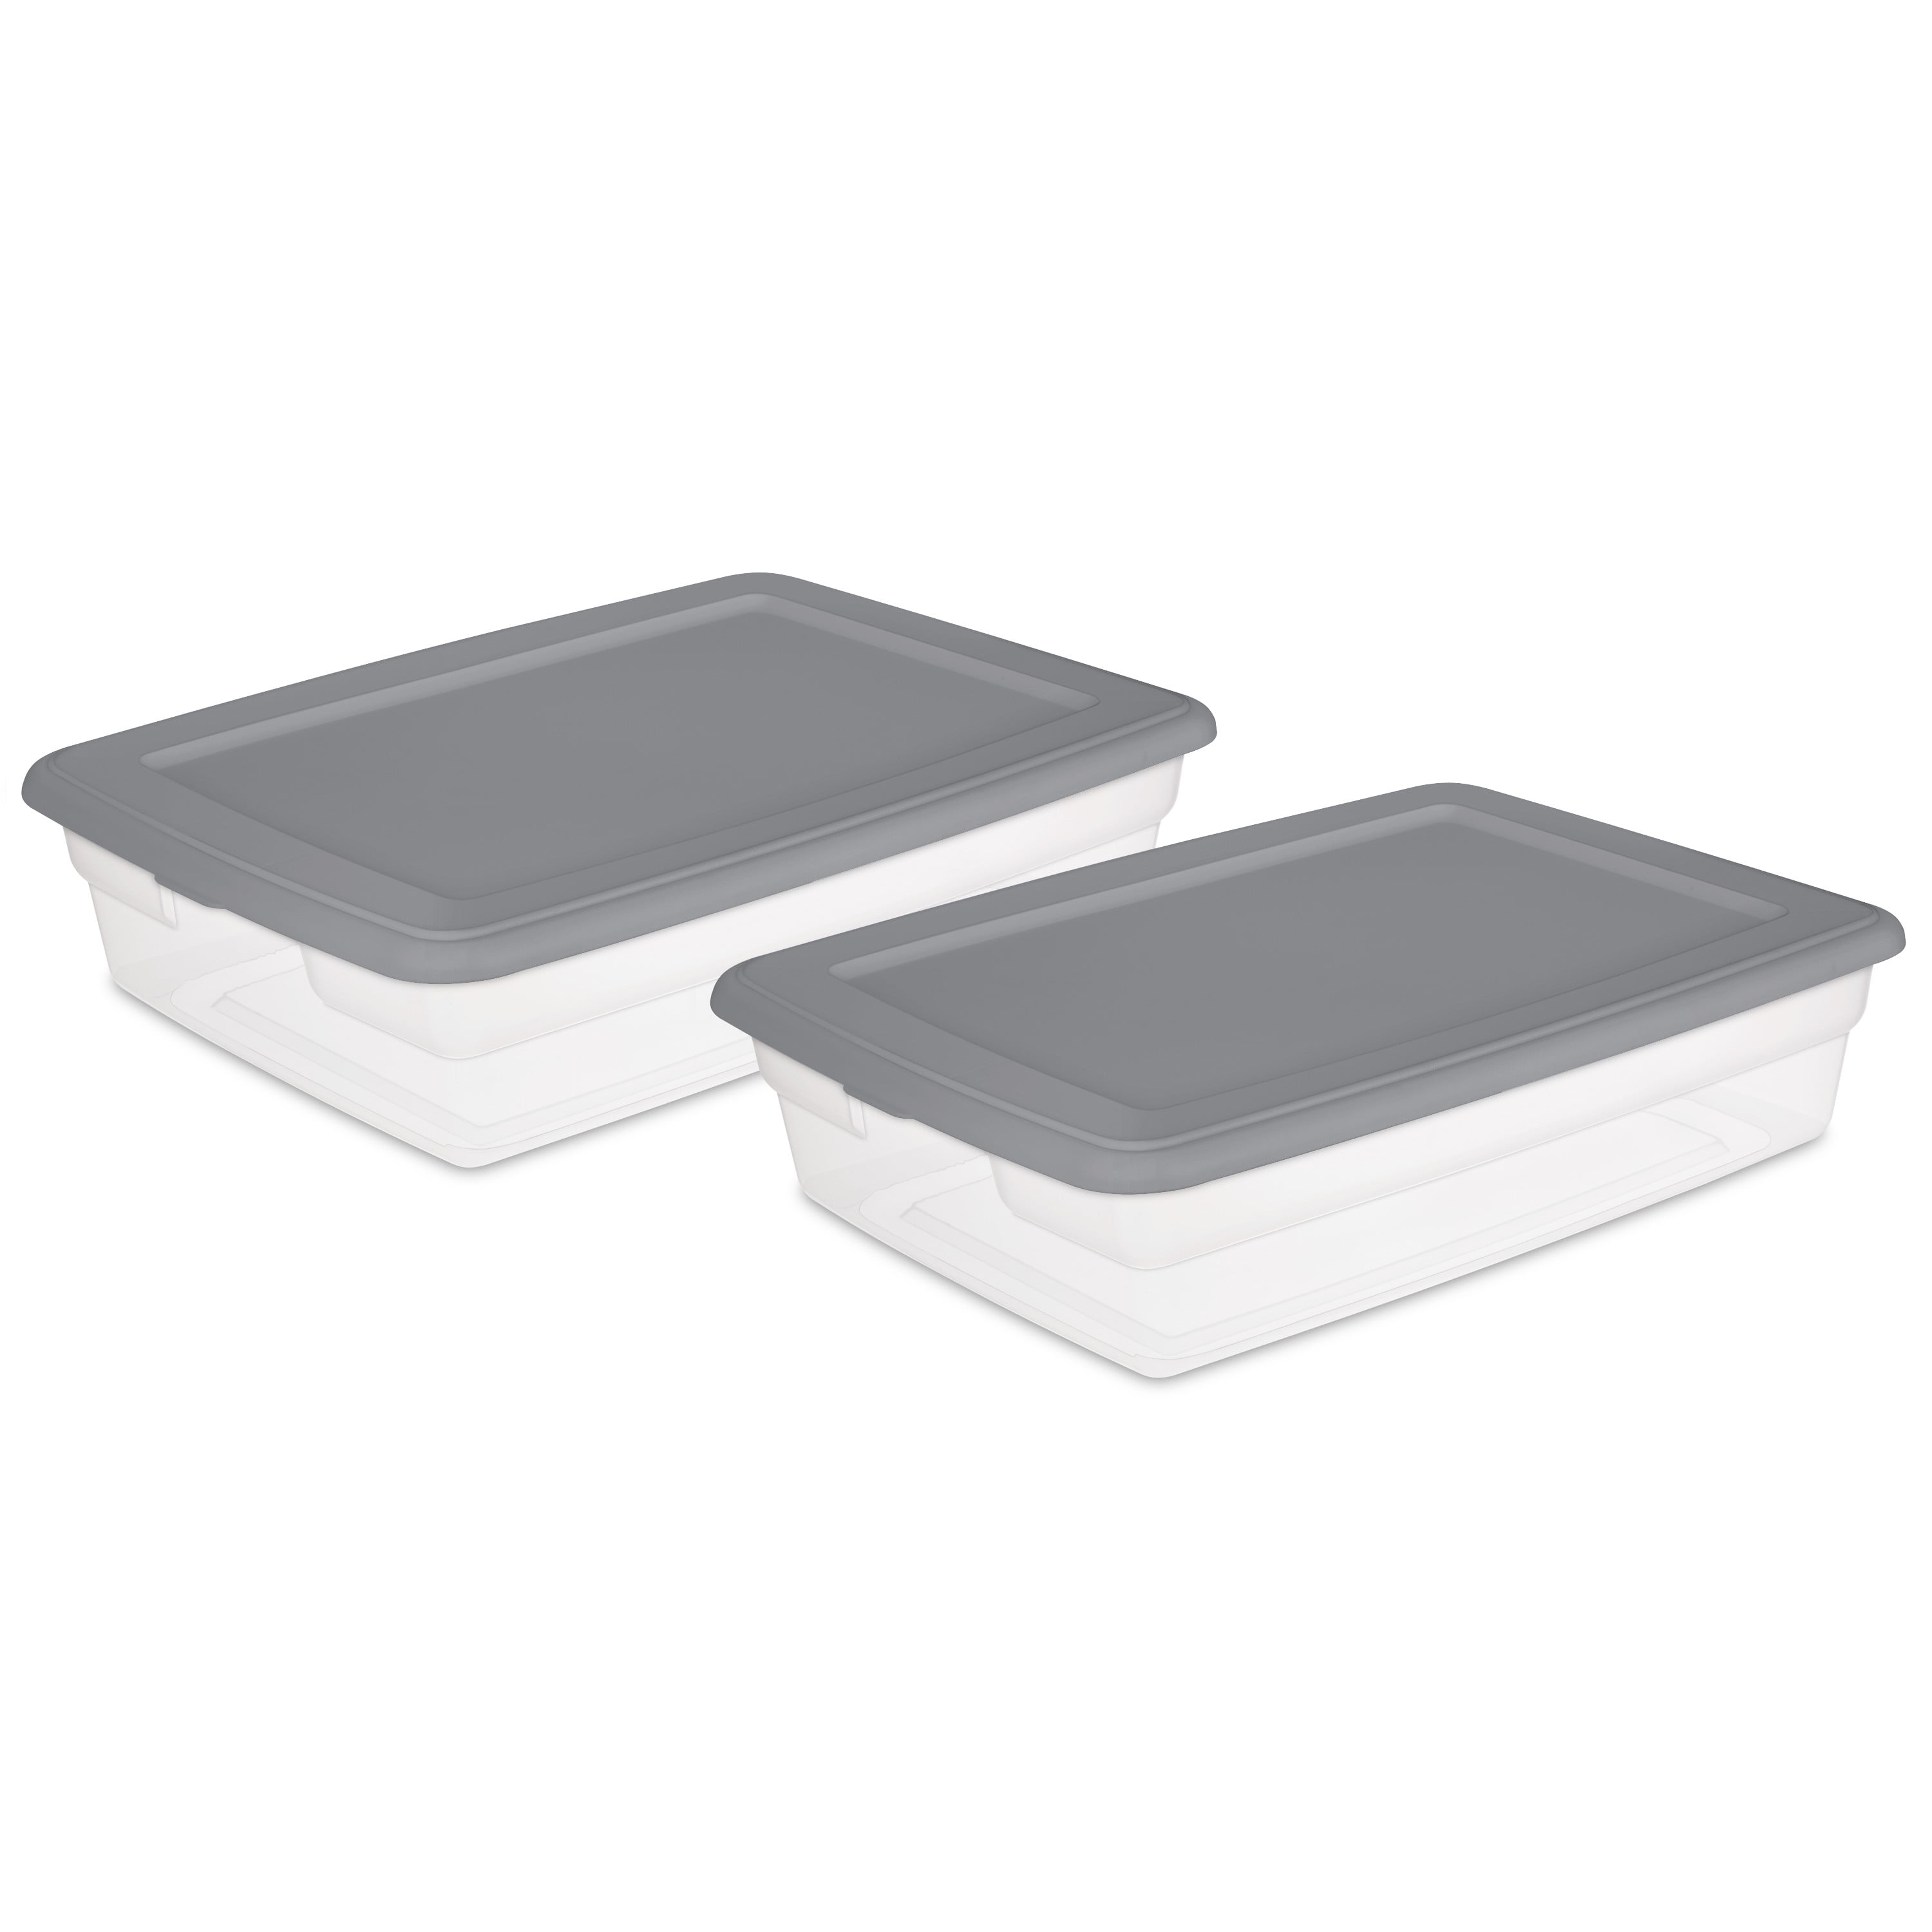 Set of 2 Black Plastic Container w/ Wood Lid